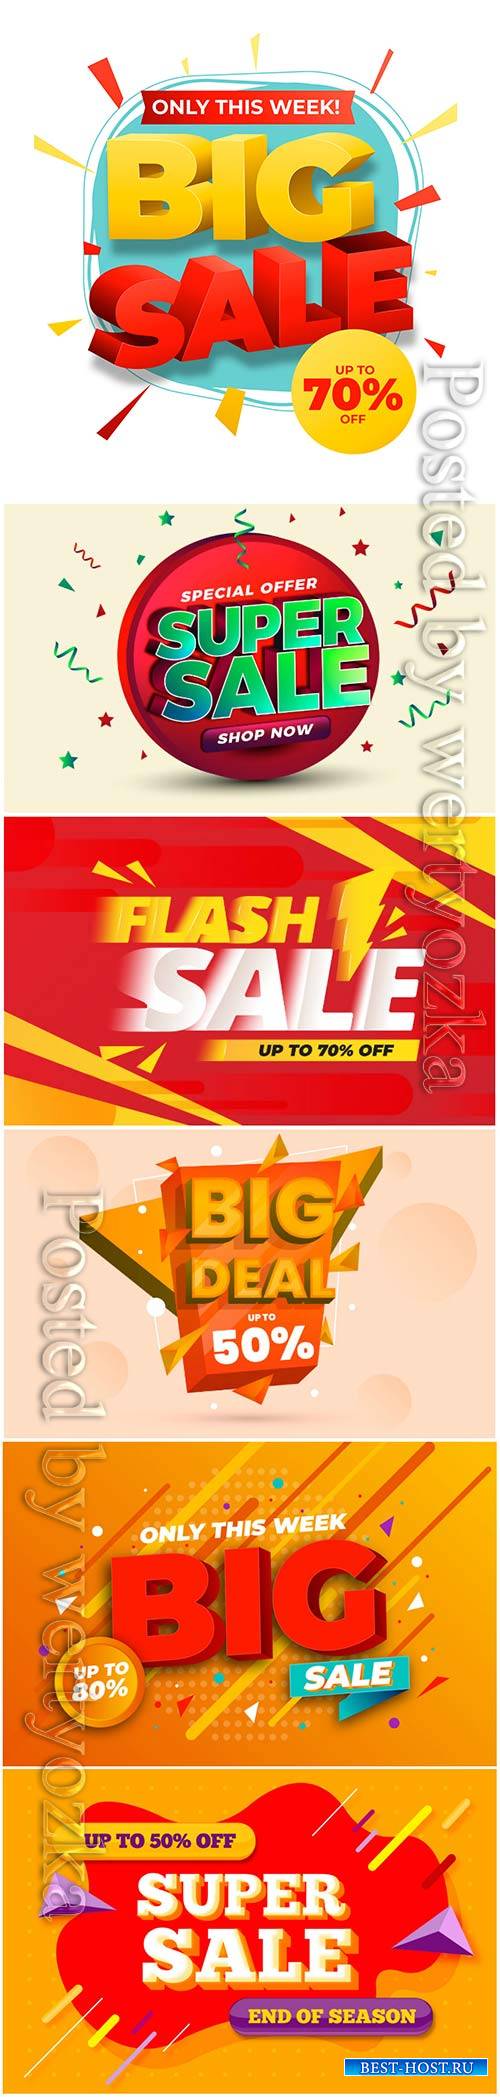 Colorful 3d sales vector background # 4